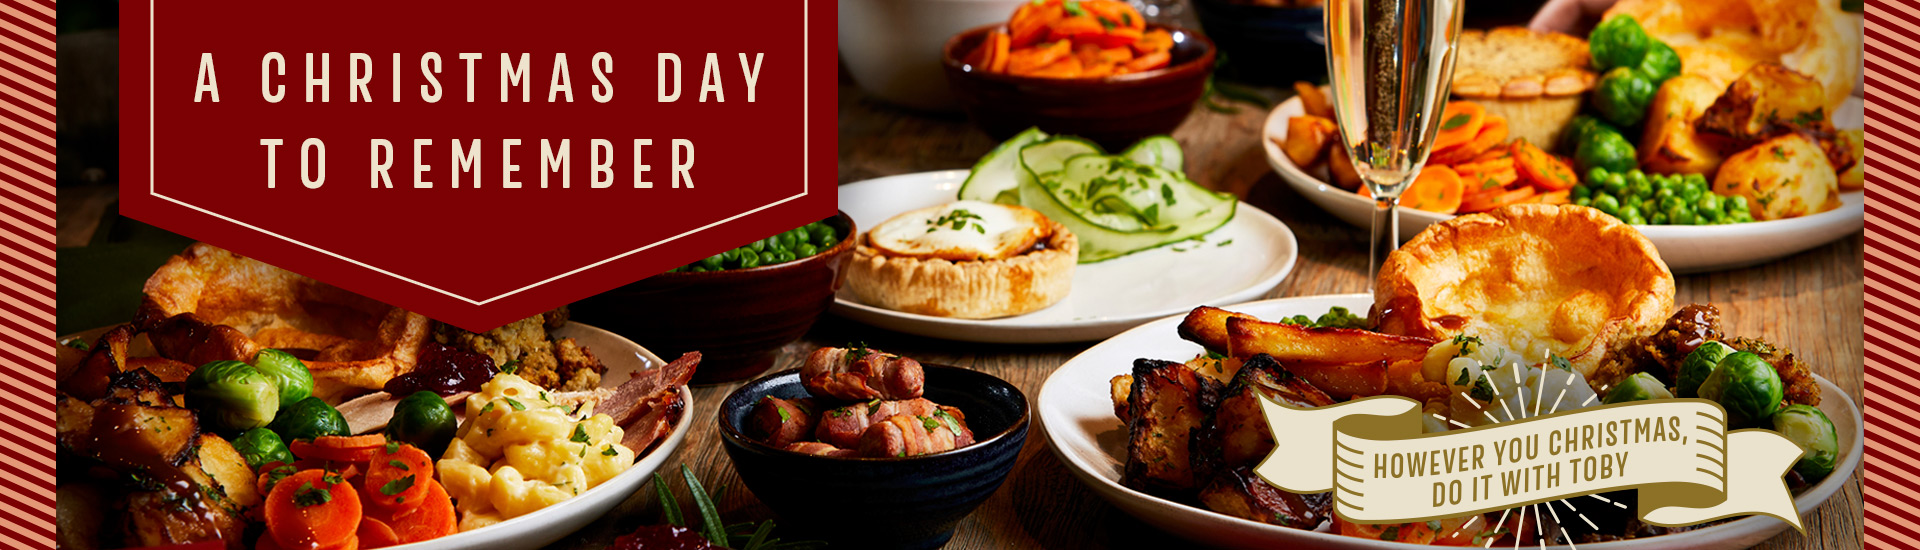 Christmas Day menu at Toby Carvery Watergate Toll